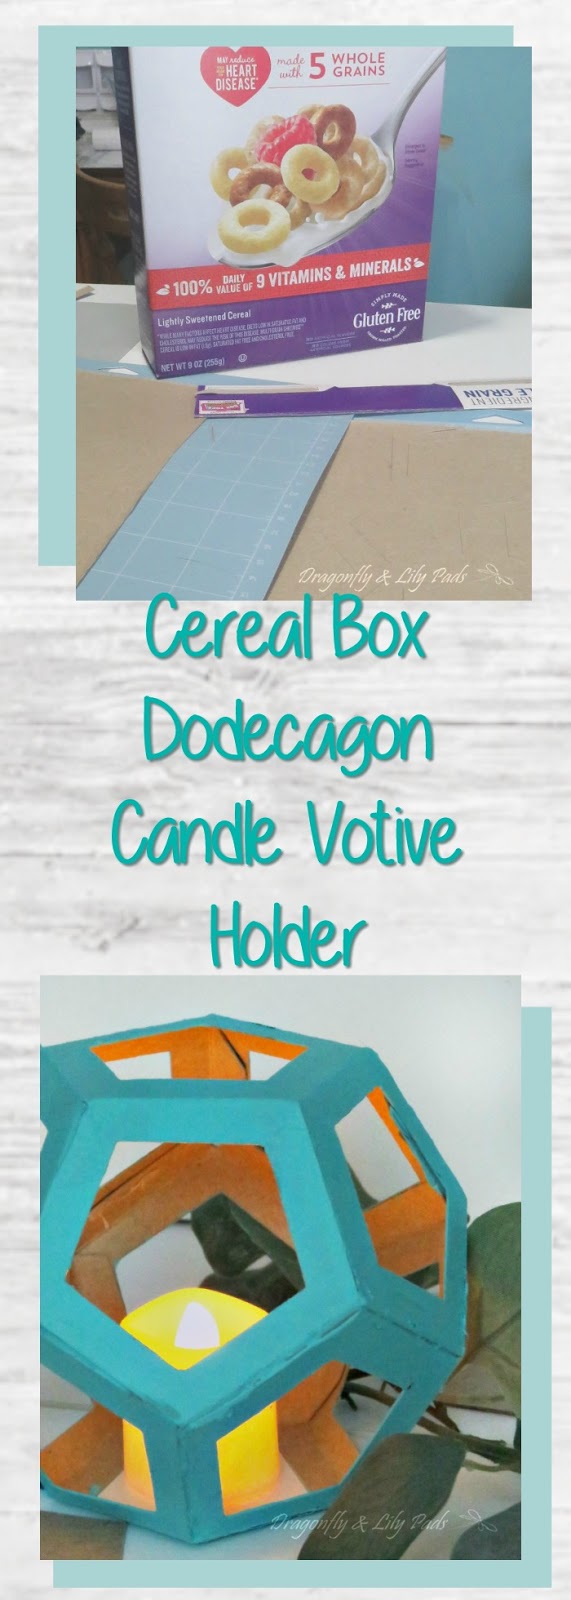 Cereal Box made into Dodecagon Votive Candle holder for Battery Operated Candle